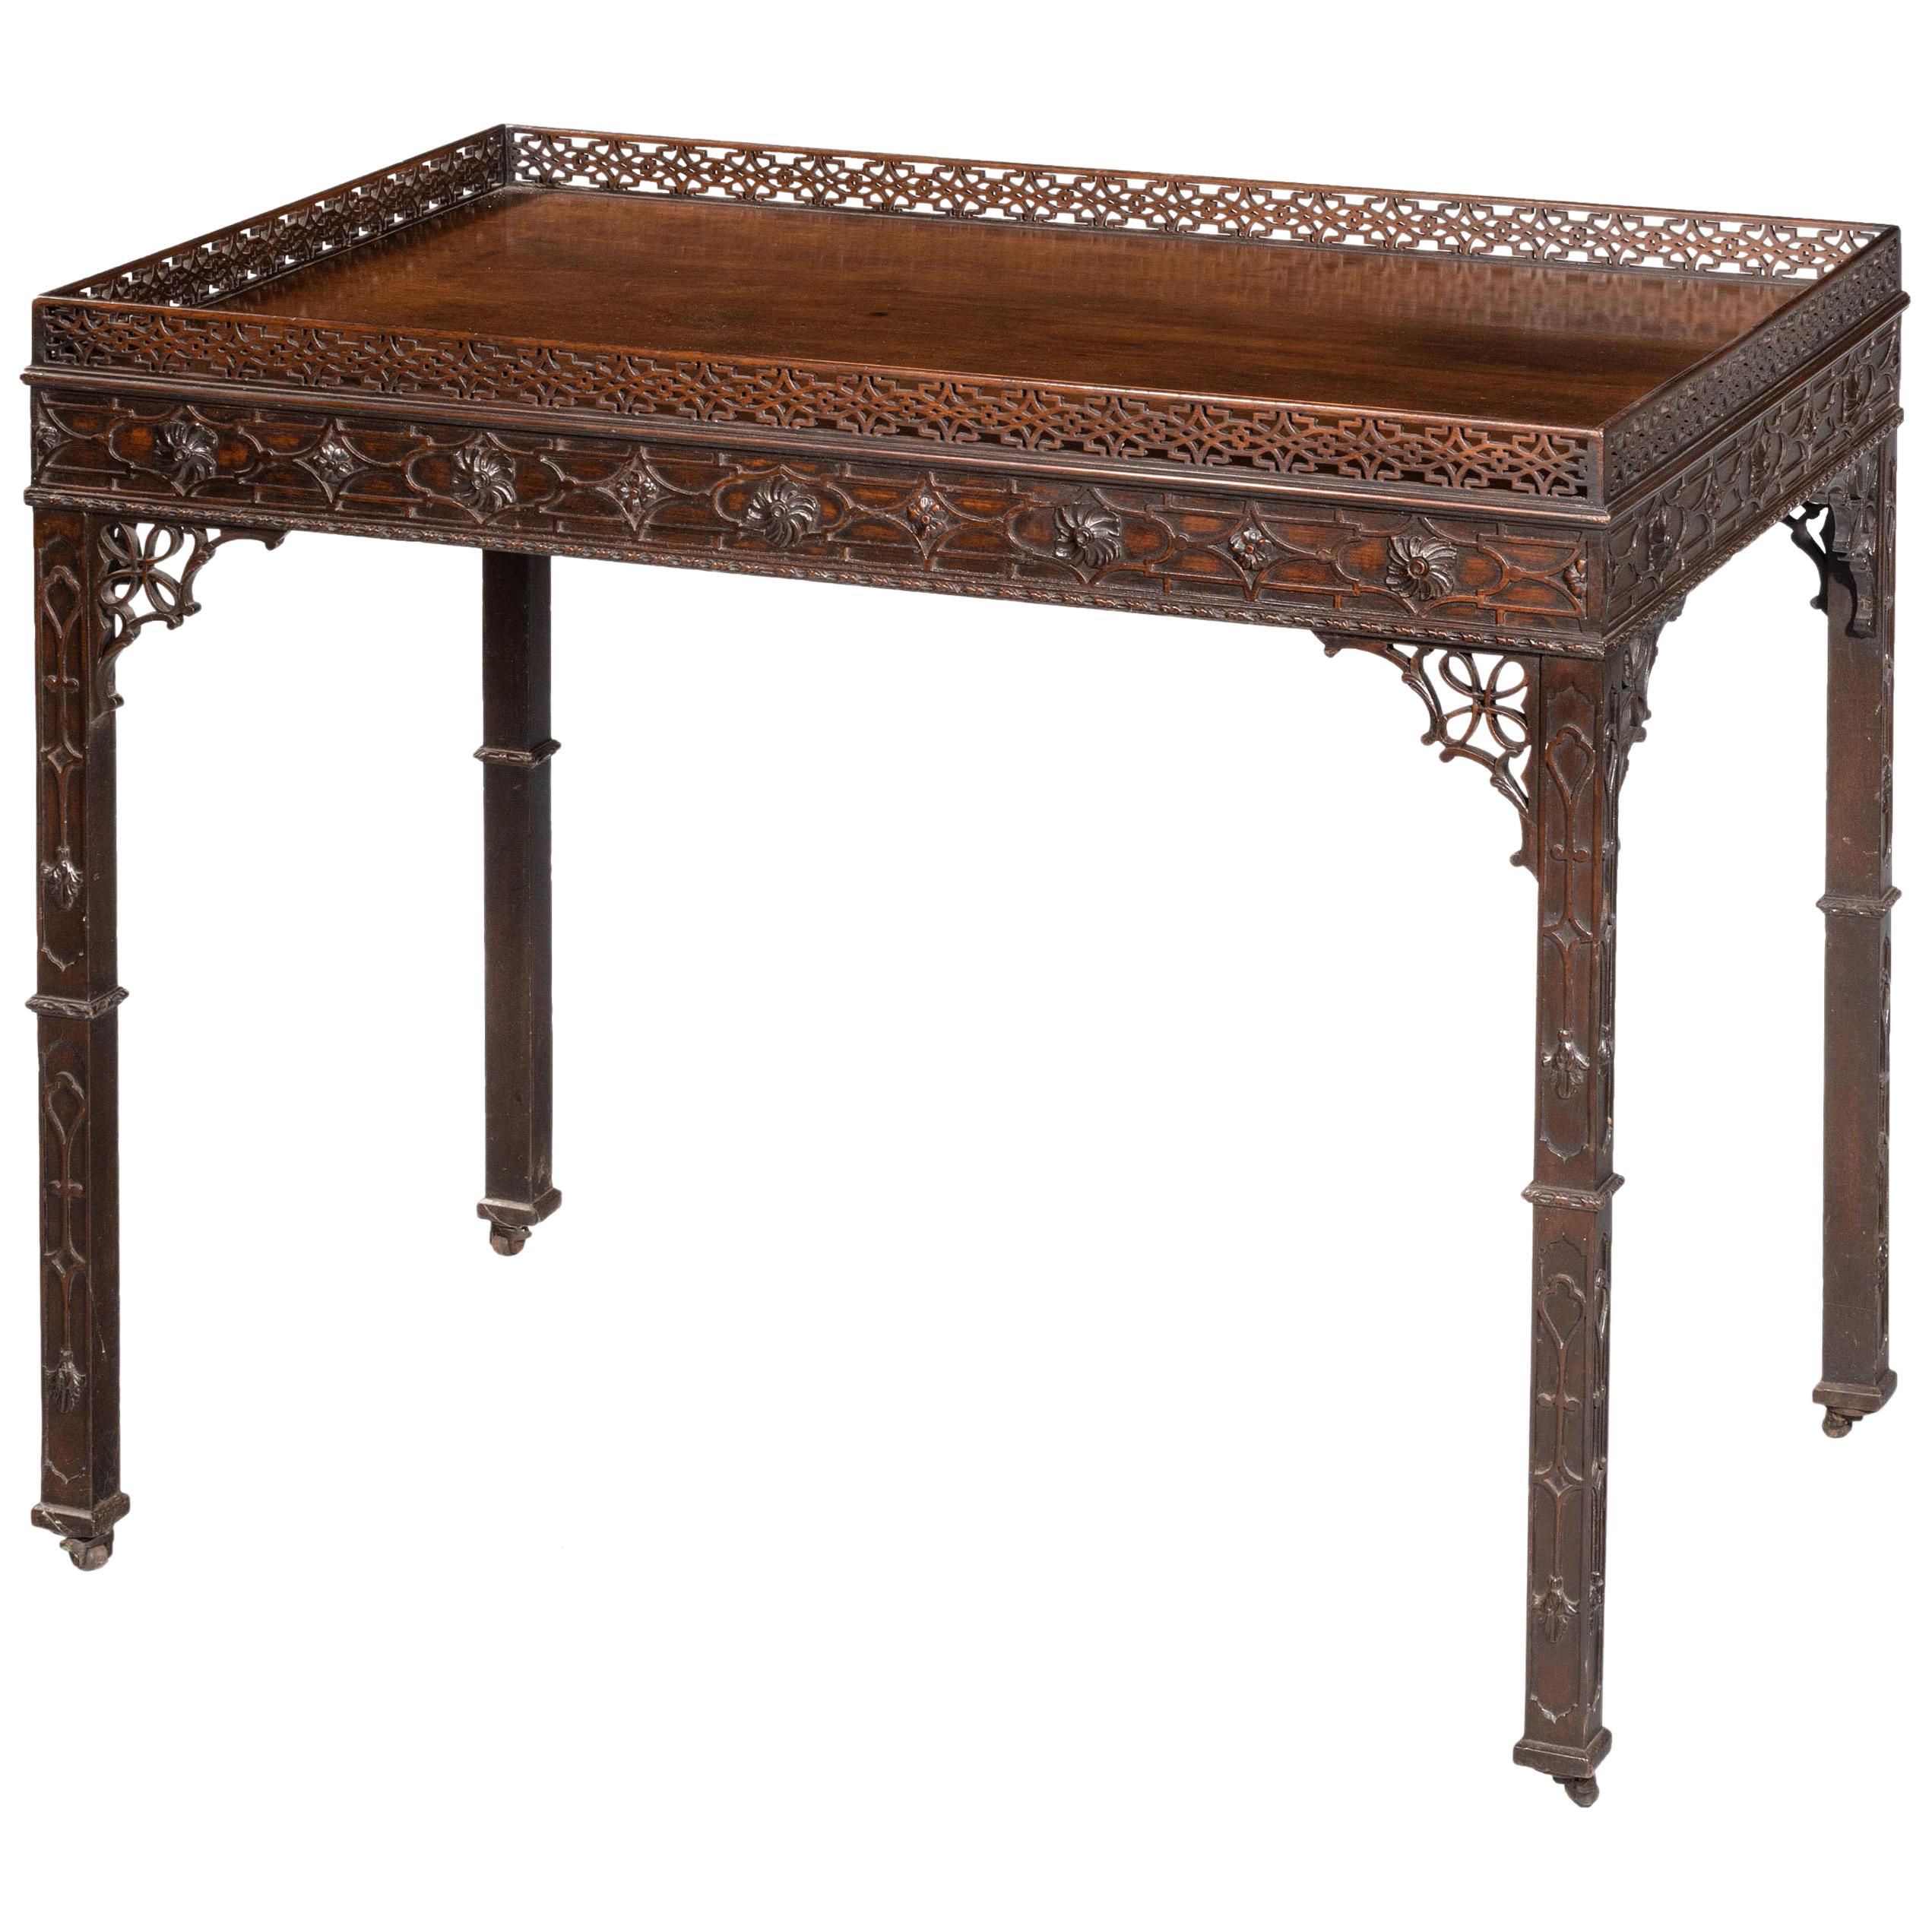 Exceptionally Fine 18th Century Chippendale Period Silver Table